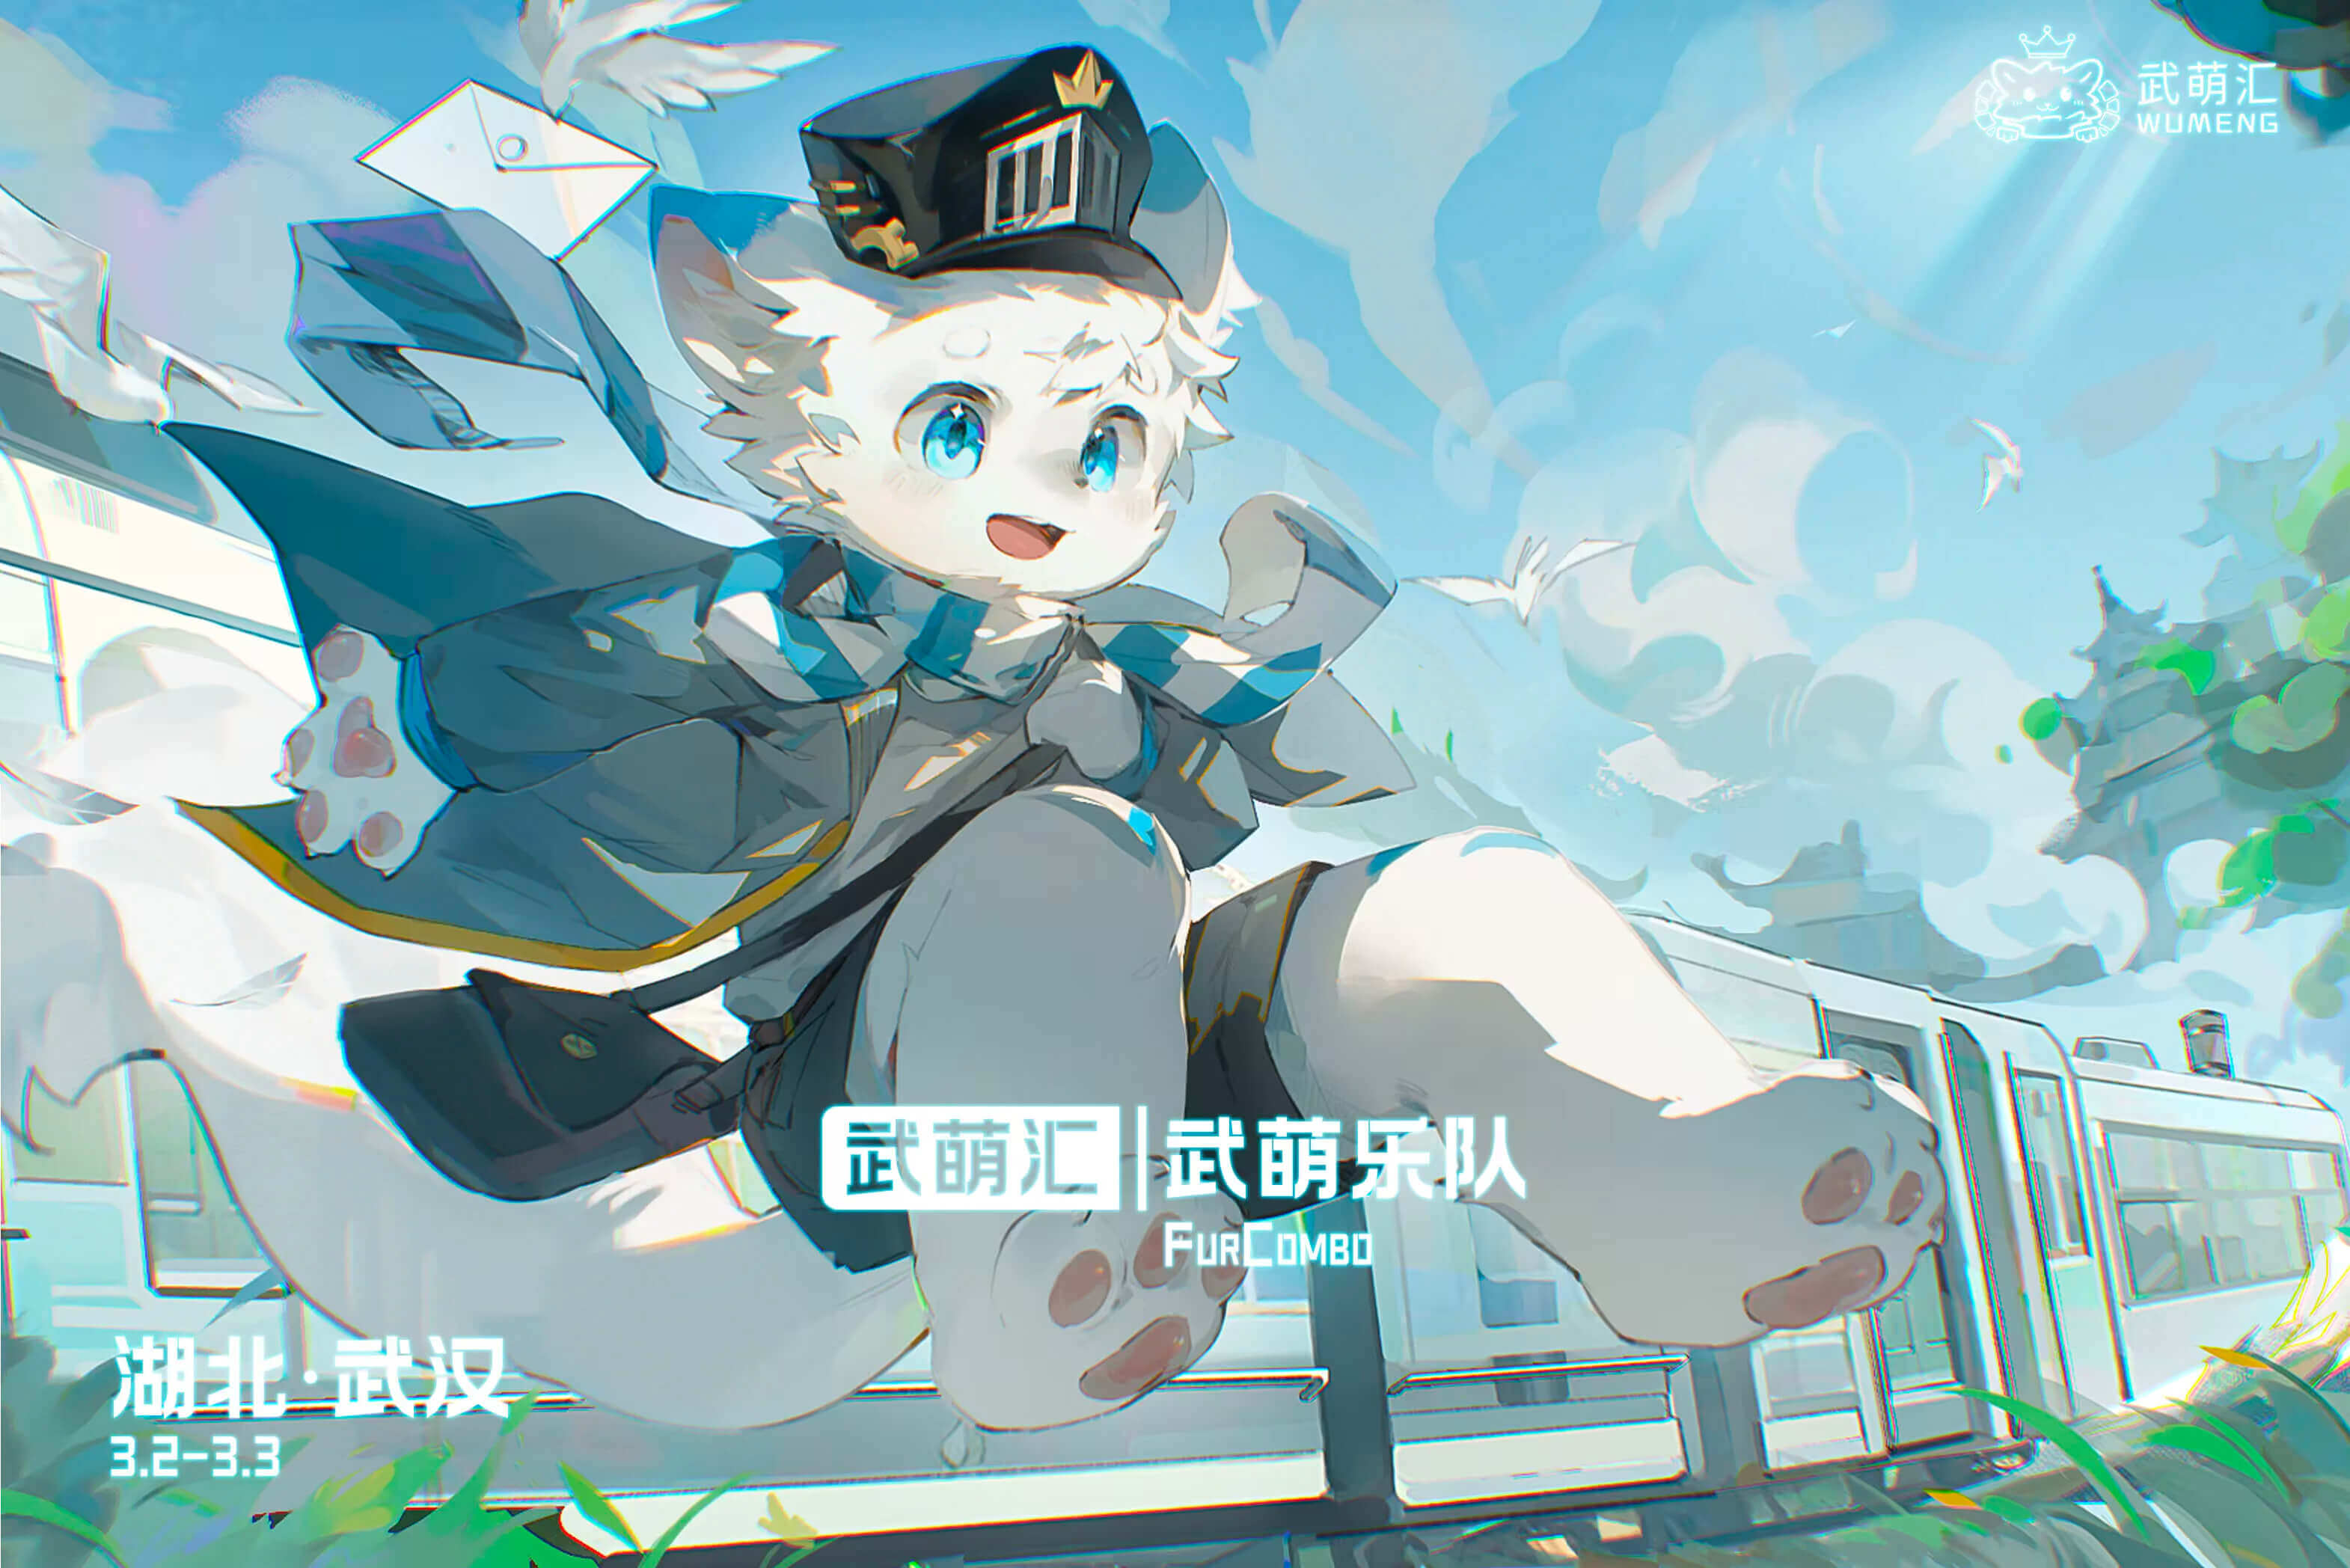 The event cover of FurCombo武萌汇